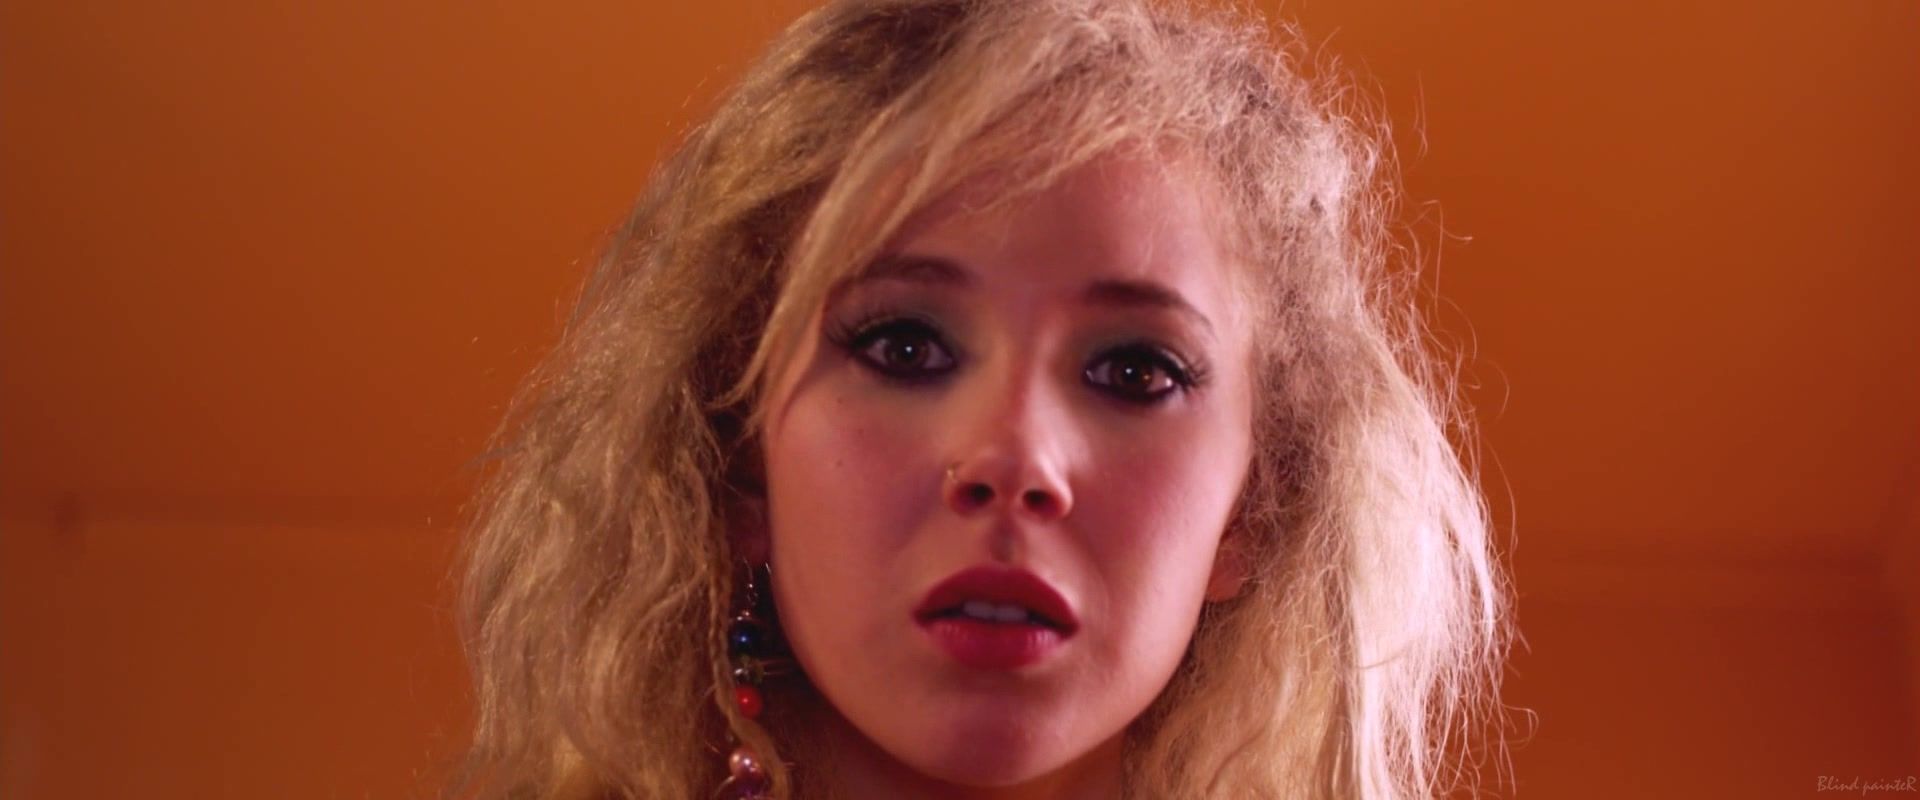 Linda Juno Temple nude - Kaboom (2010) Pounded